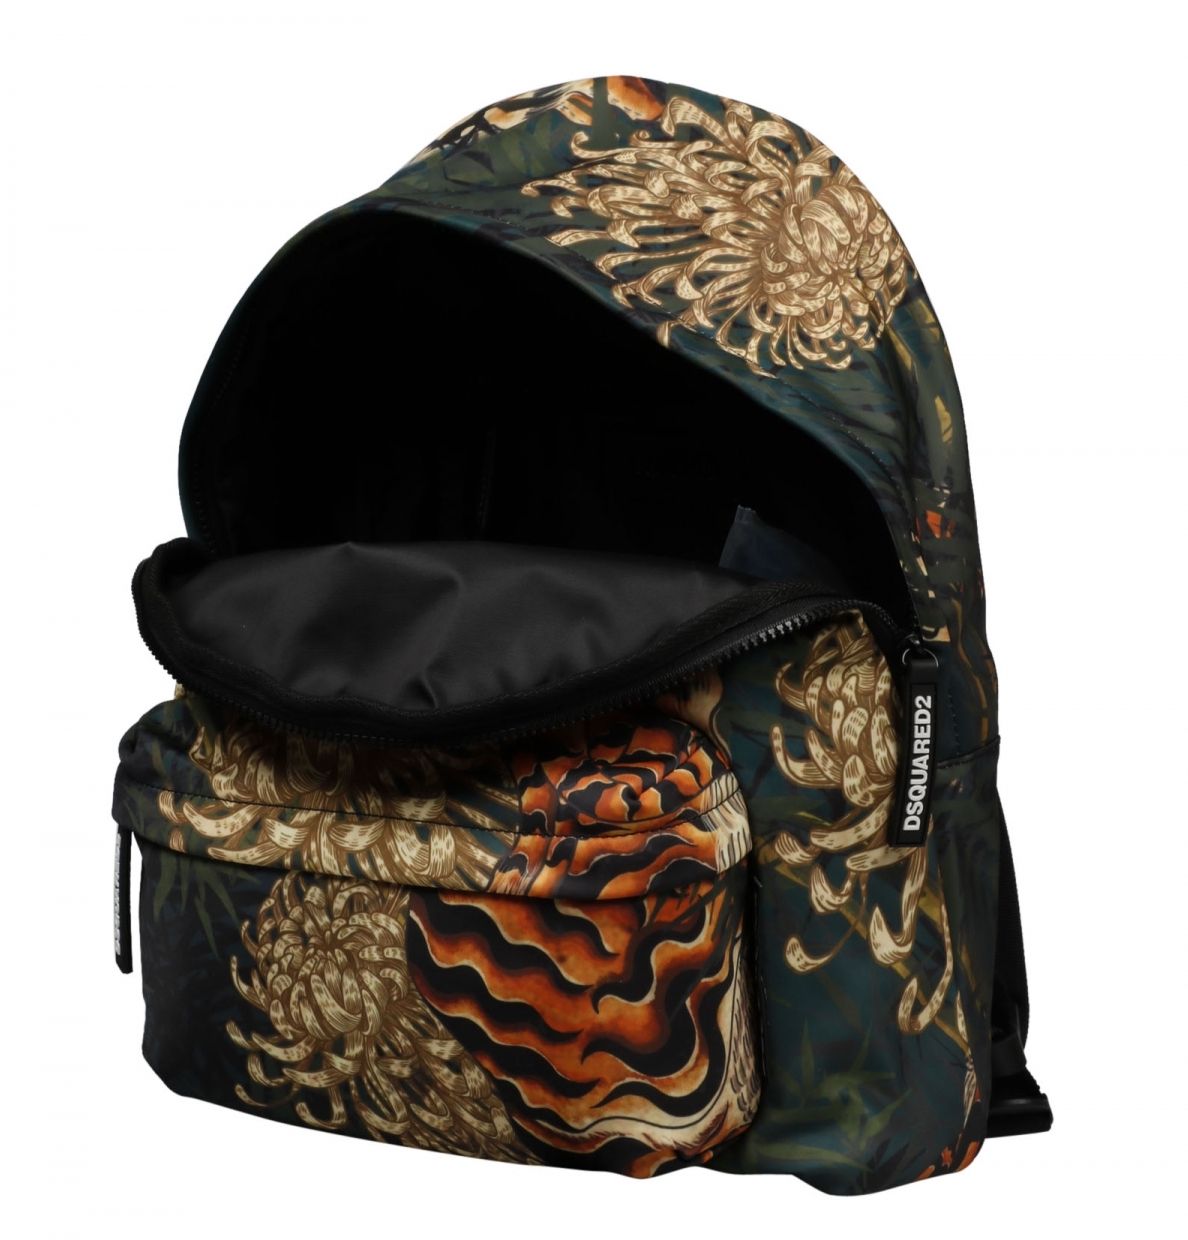 Elegant Green Tiger Print Backpack with Leather Accents